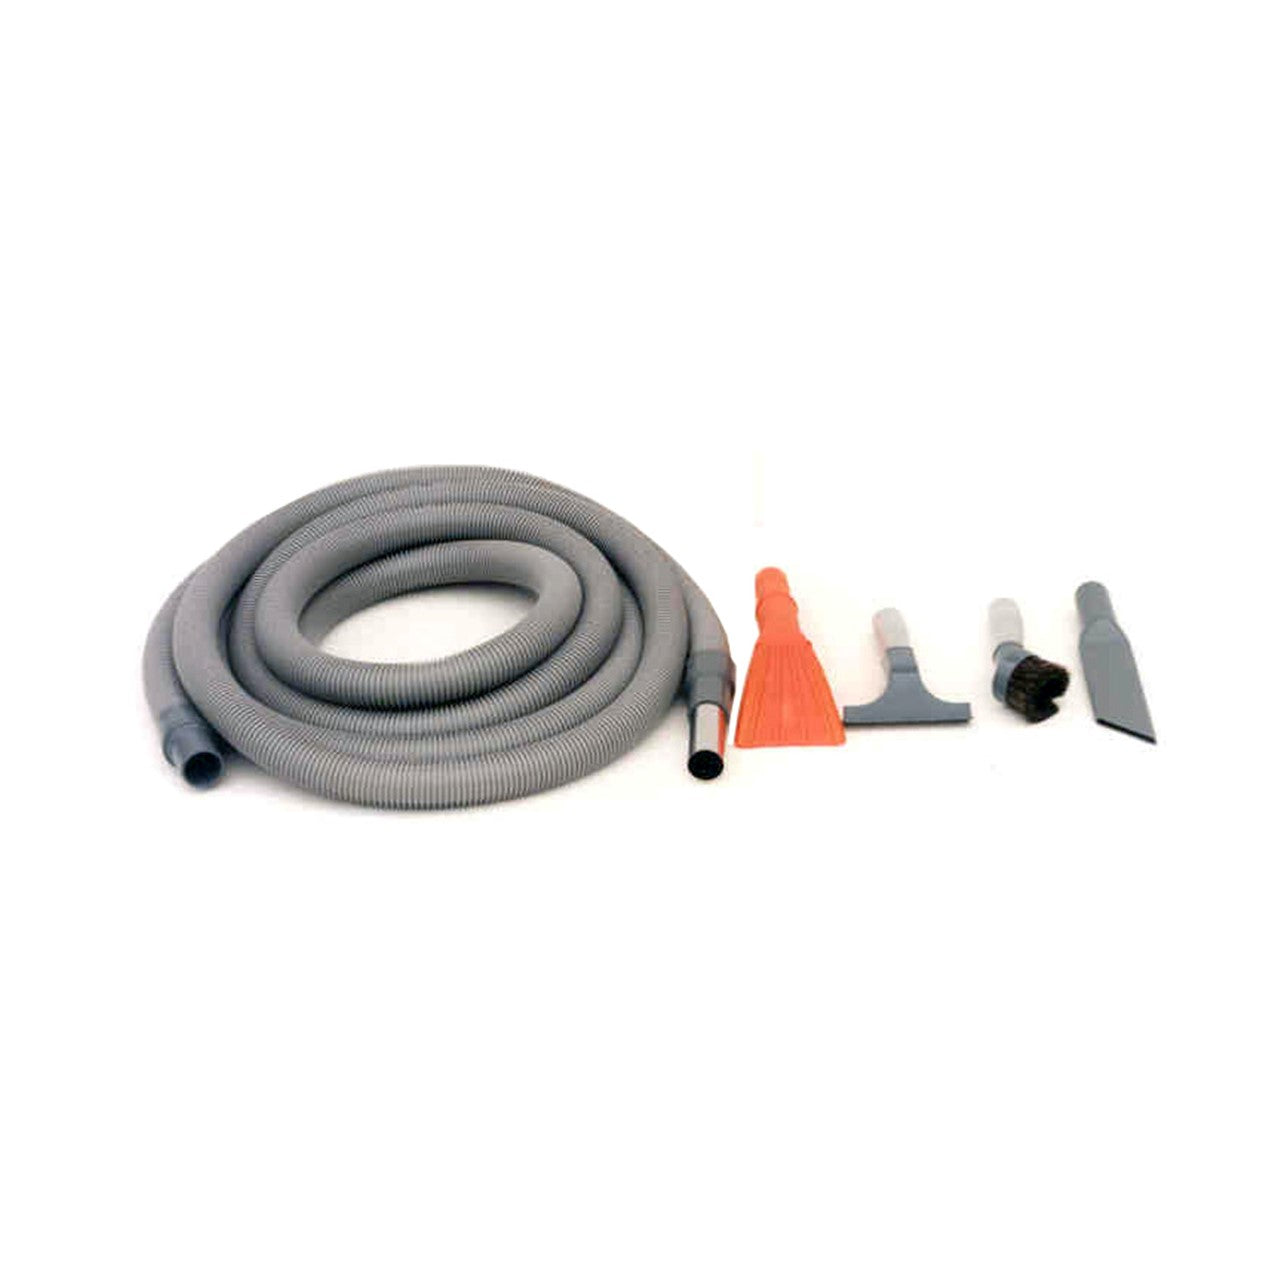 1-1/2" Vehicle Cleaning Package (Anti-Static Hose)